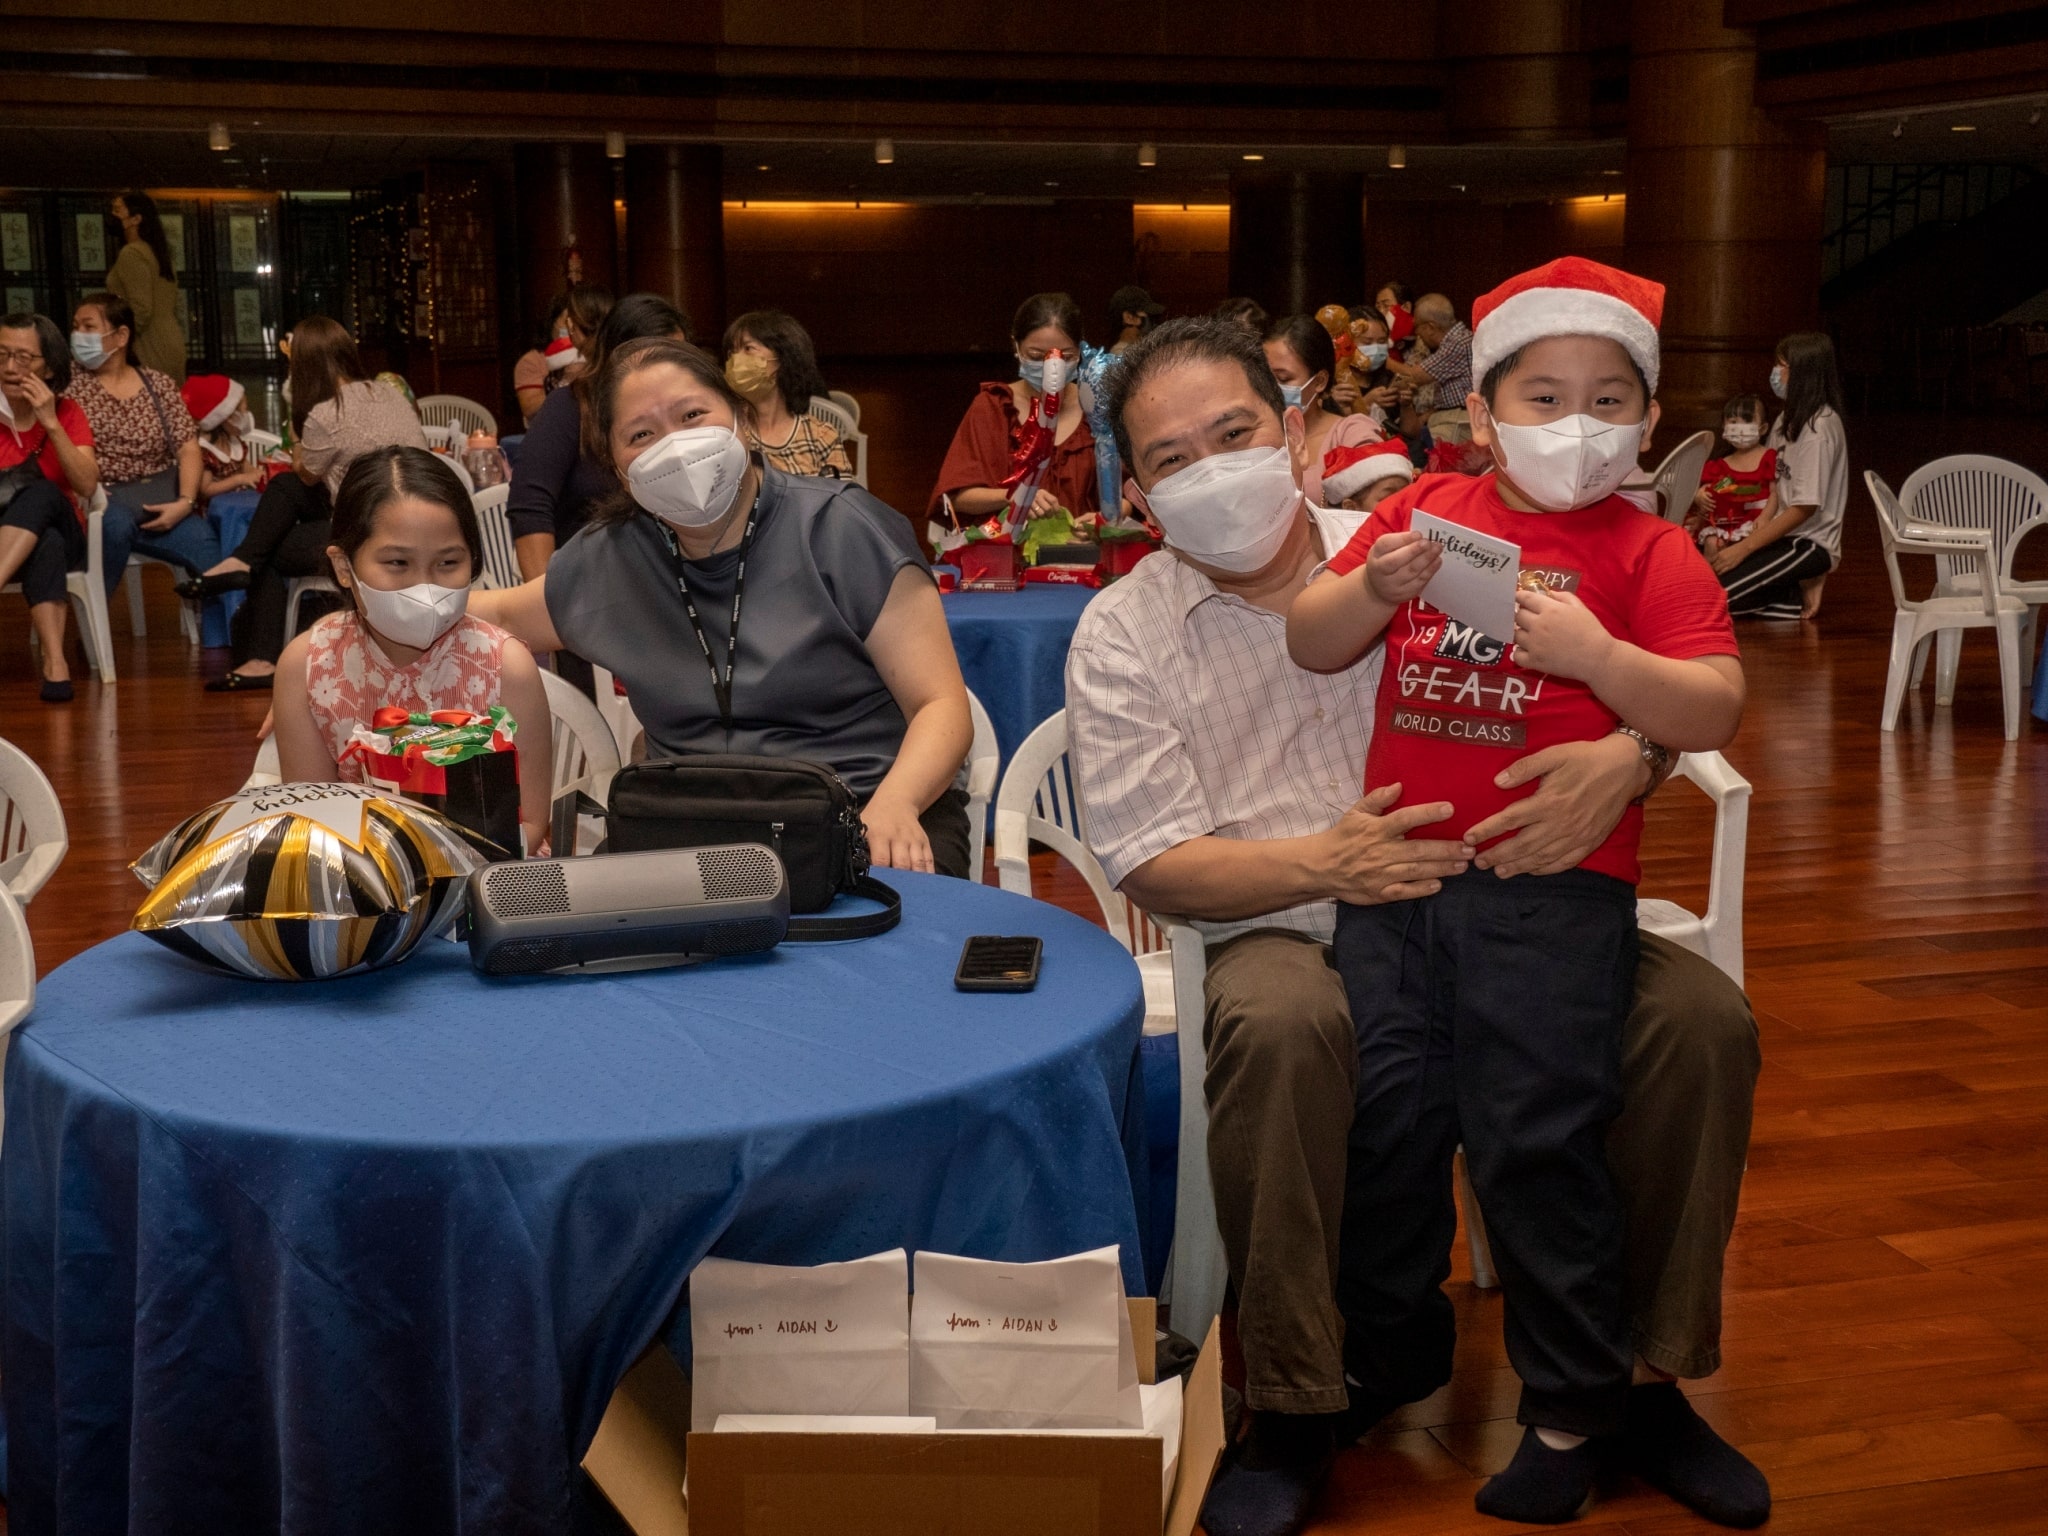 Students’ families attend in full support of the thanksgiving program.【Photo by Harold Alzaga】